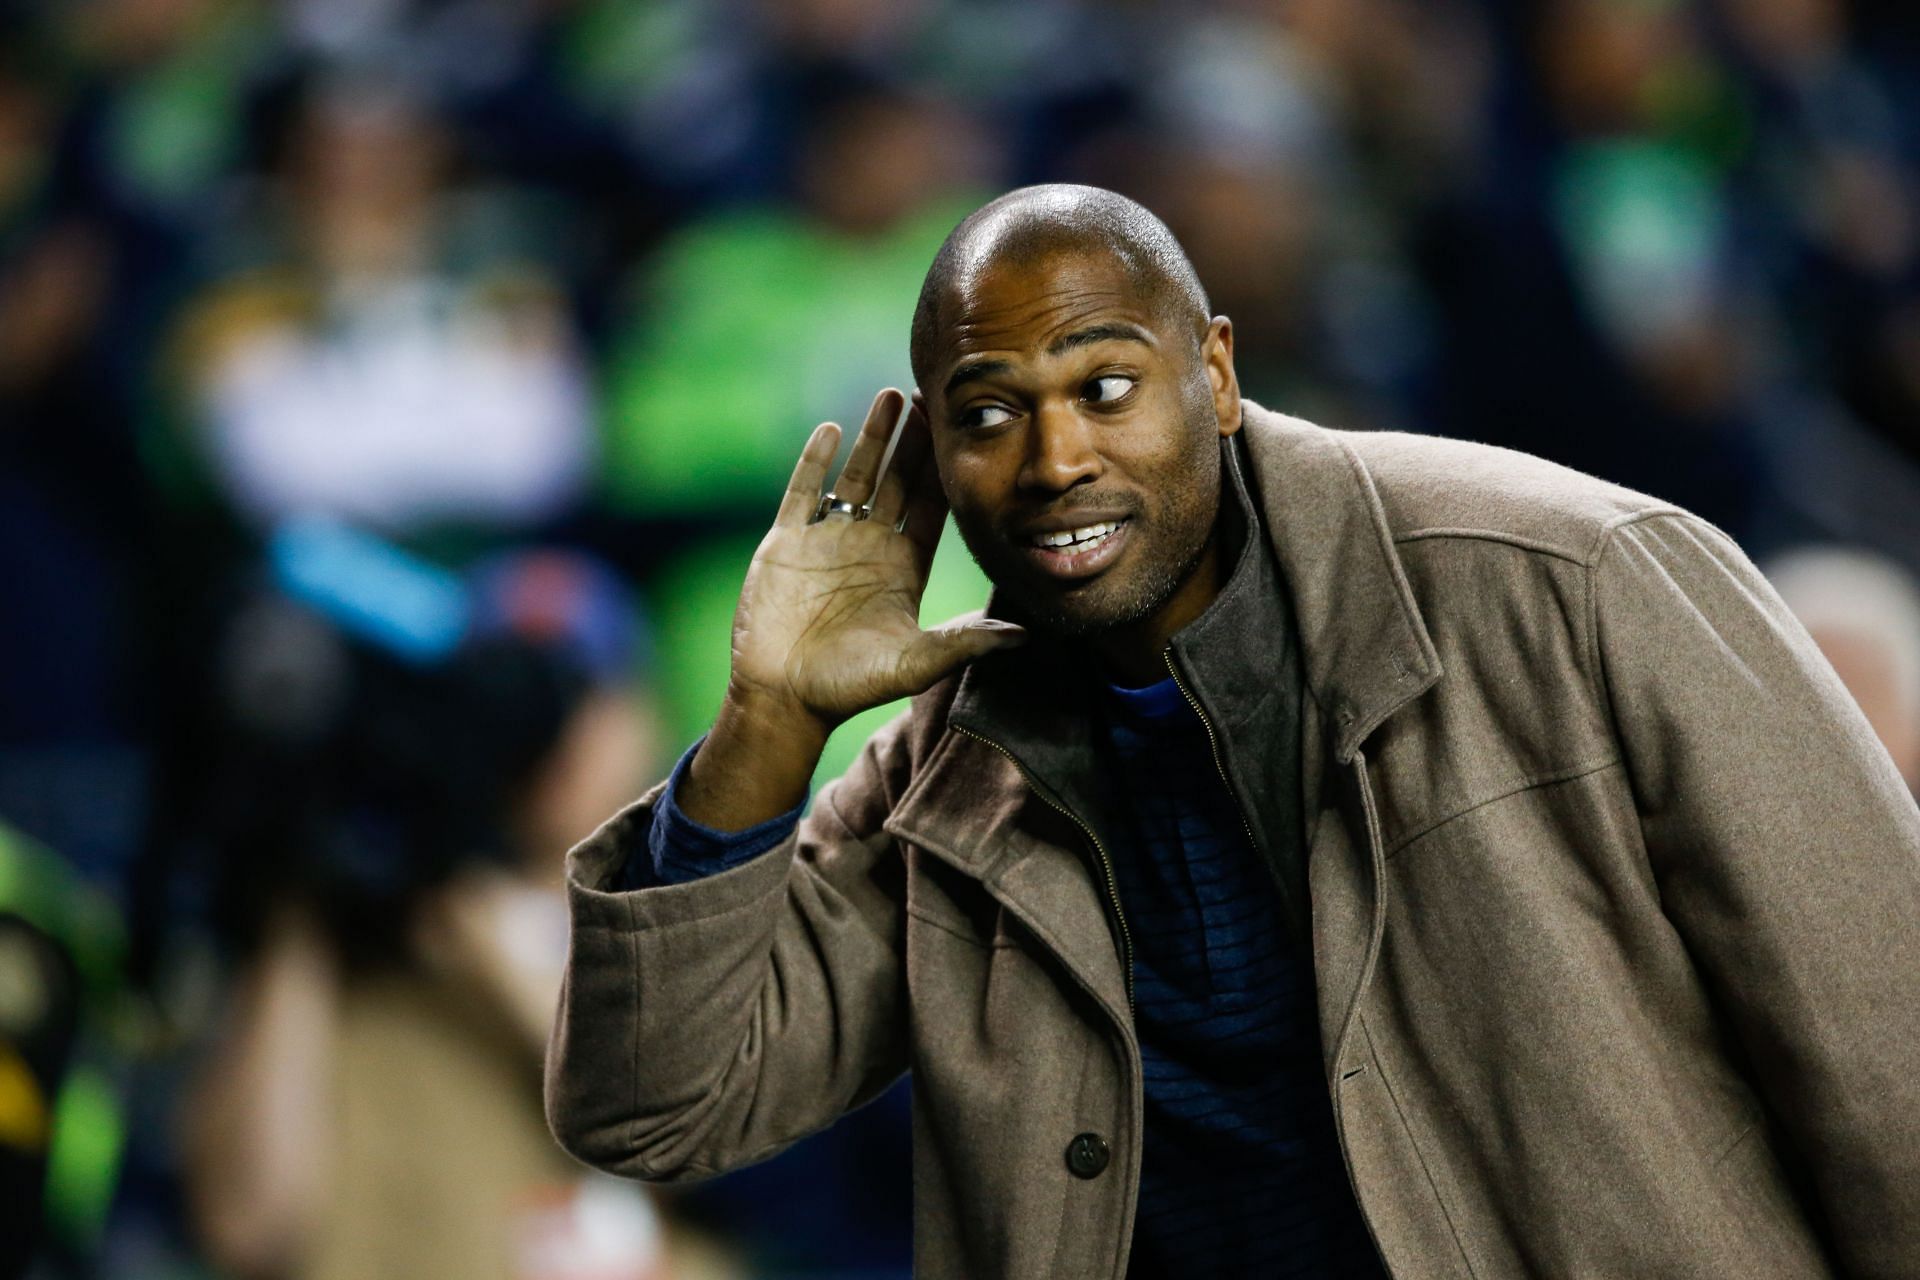 Shaun Alexander at the Green Bay Packers v Seattle Seahawks NFL game